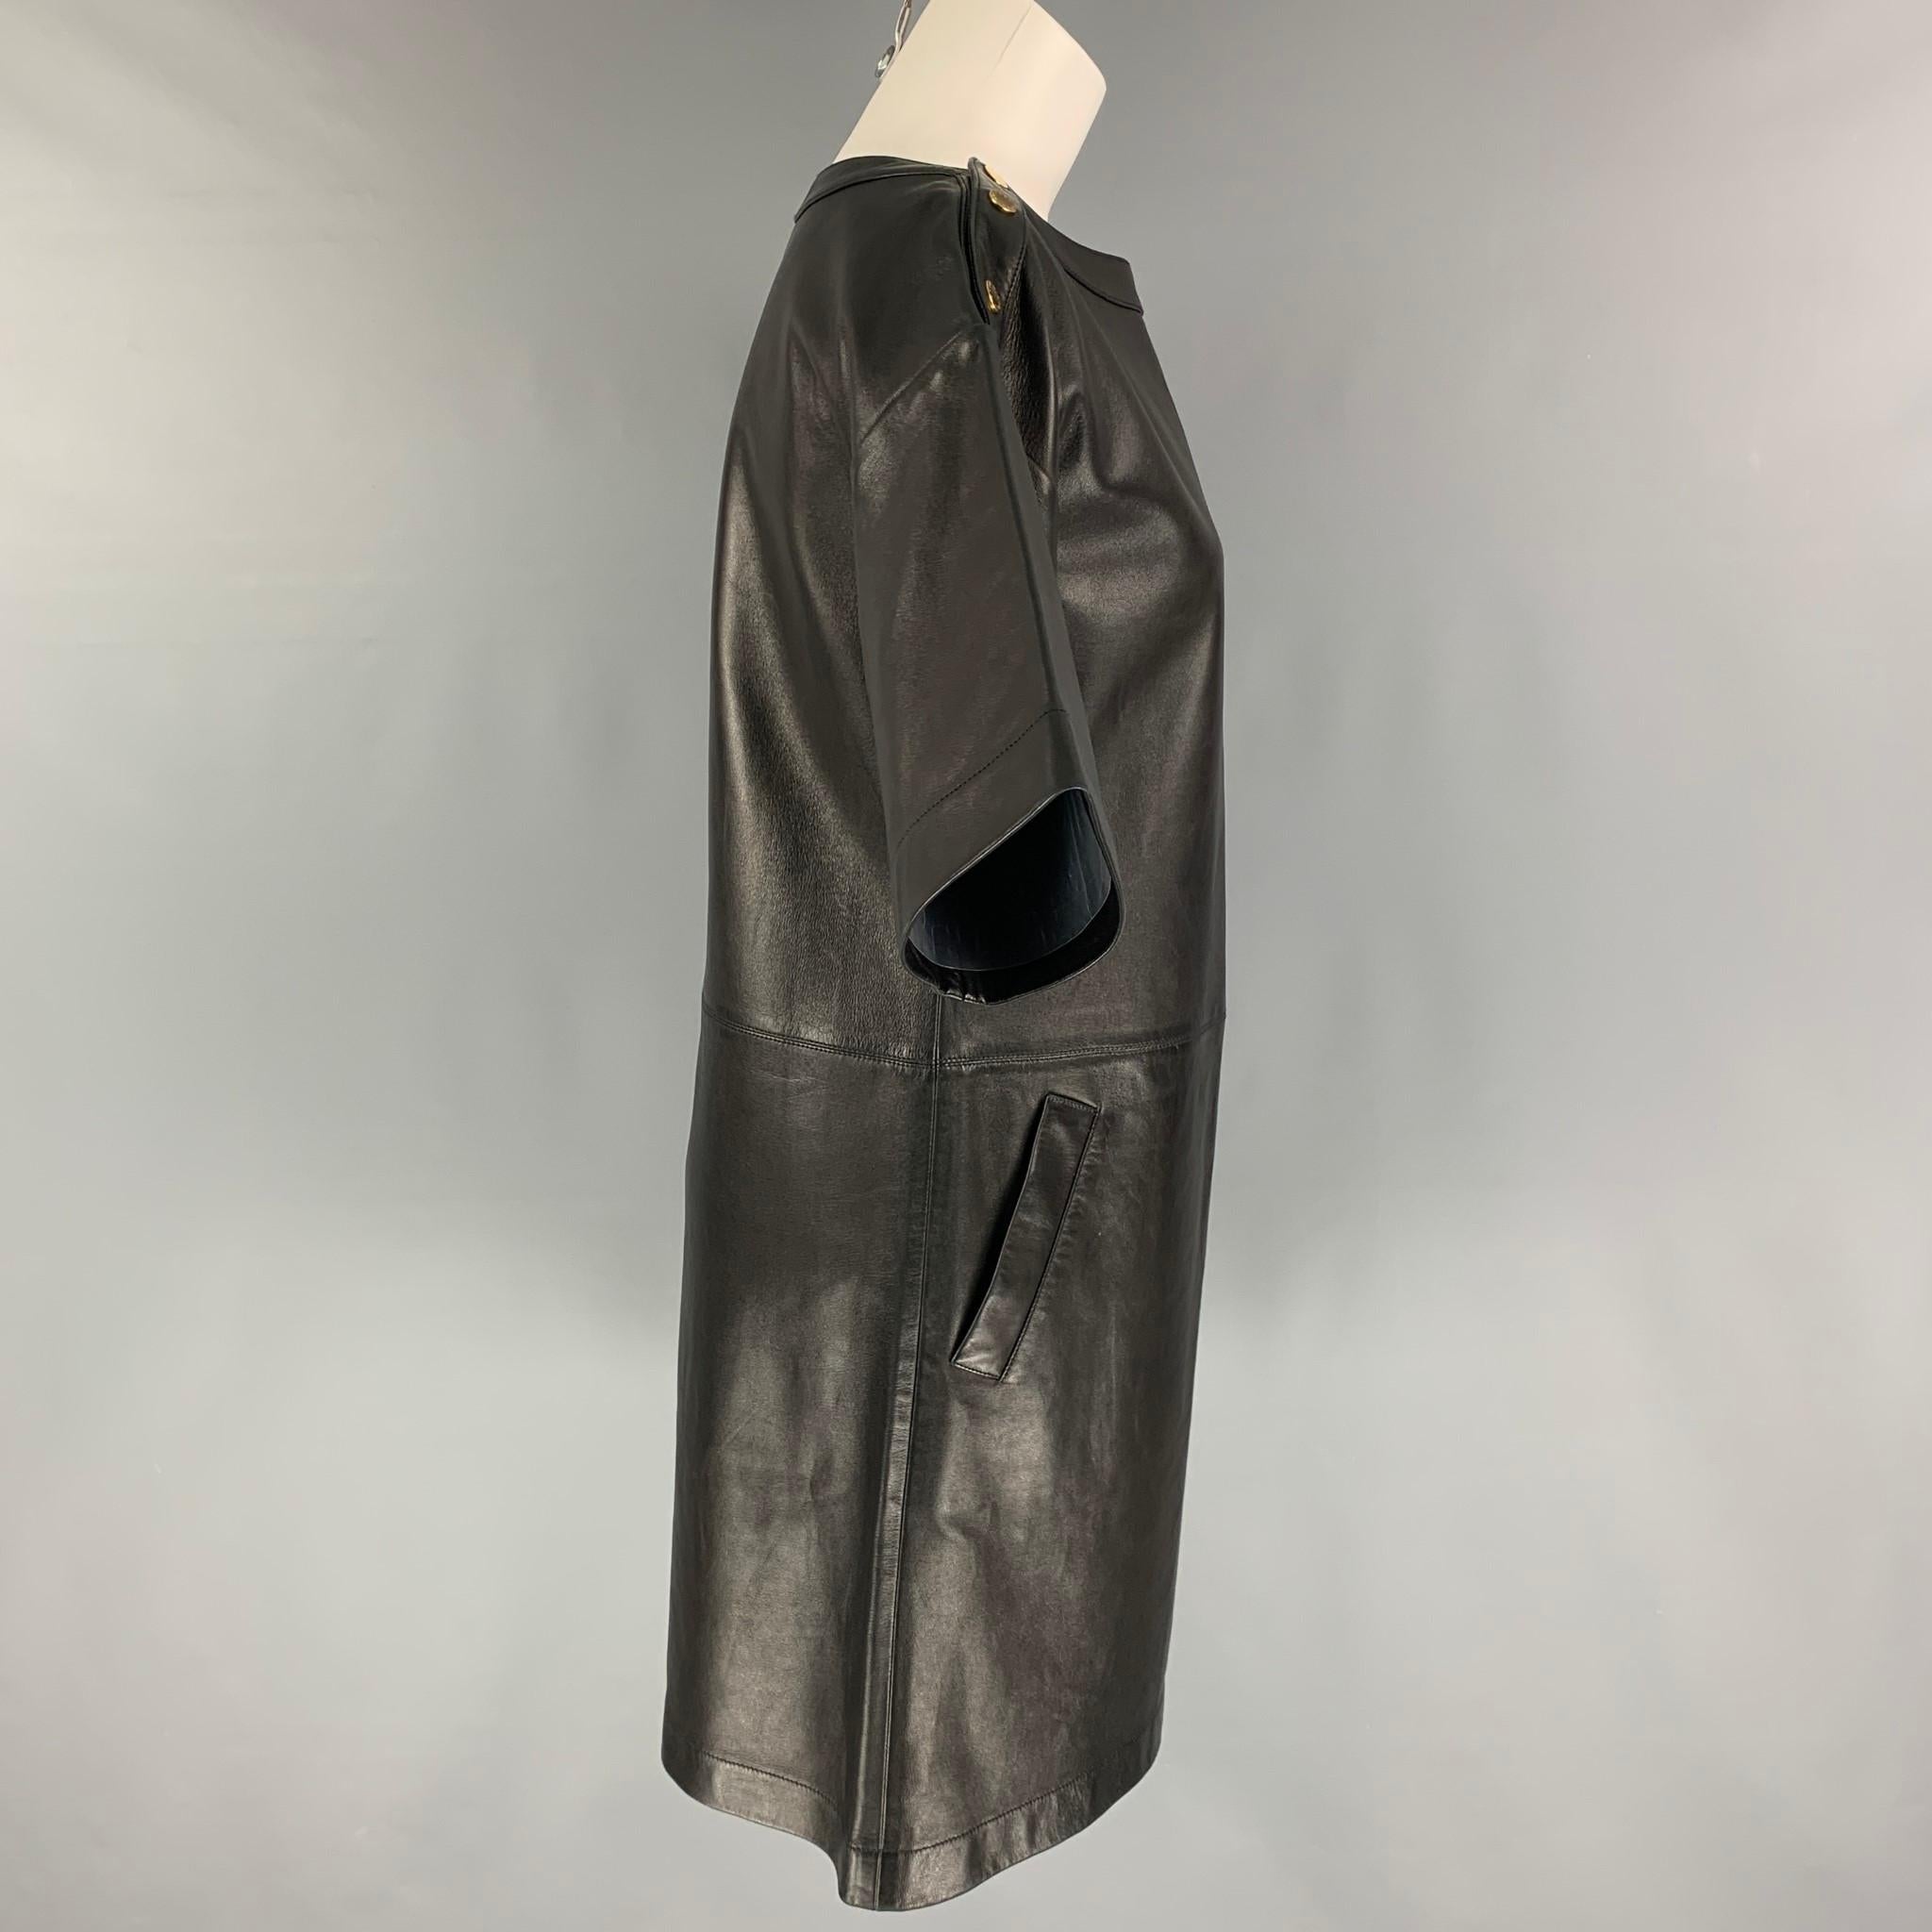 MICHAEL KORS dress comes in a black leather featuring short sleeves, slit pockets, and gold tone shoulder snap buttons. Made in Italy. 

Very Good Pre-Owned Condition.
Marked: 4

Measurements:

Shoulder: 21 in.
Bust: 38 in.
Waist: 36 in.
Hip: 39